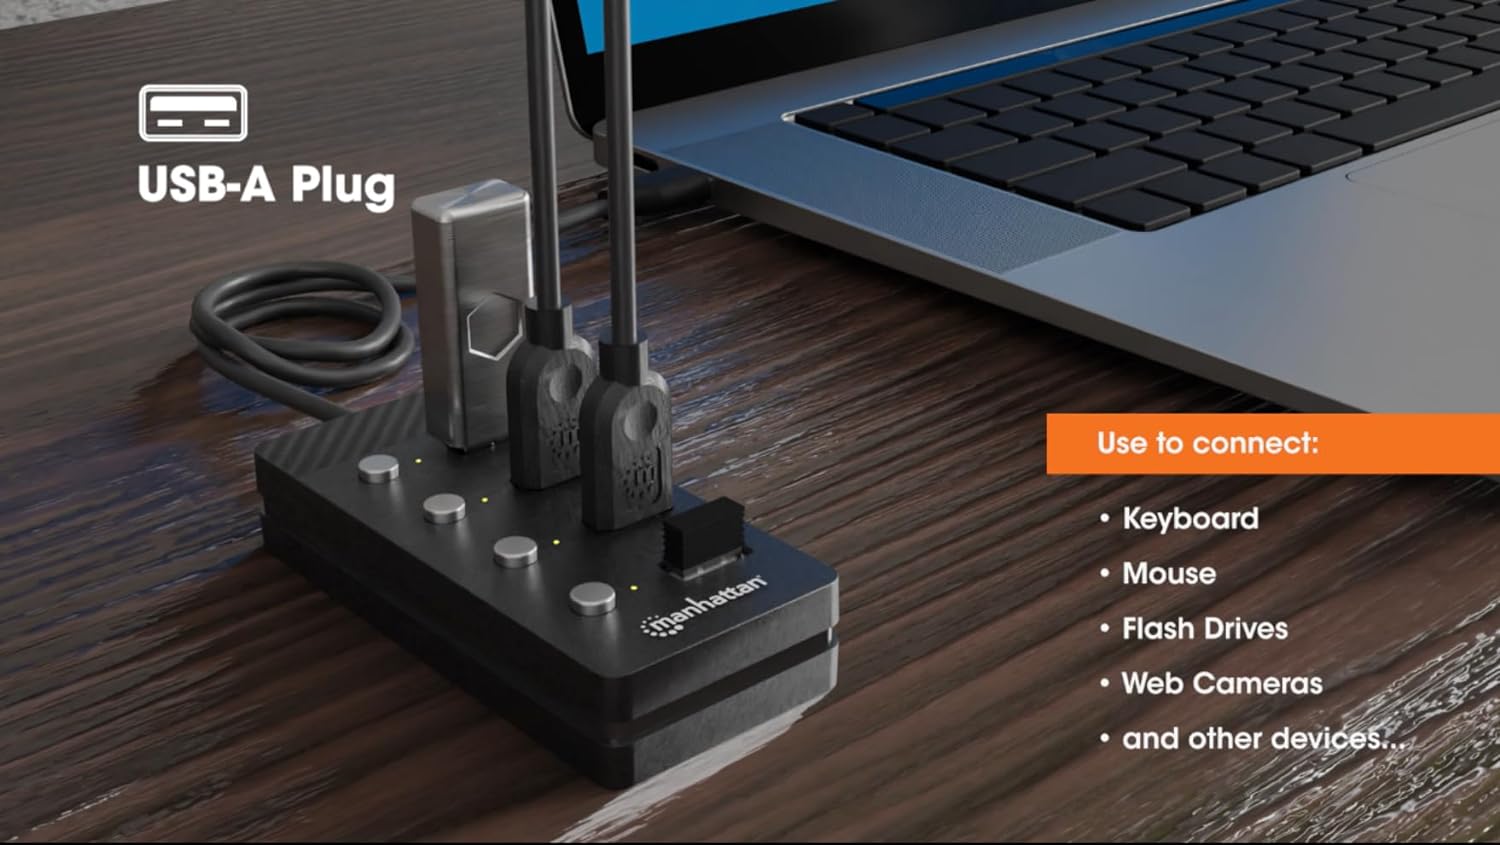 4-Port USB 3.0 Type-A Hub with 5 ft. Cable and On/Off Switch for Each Port